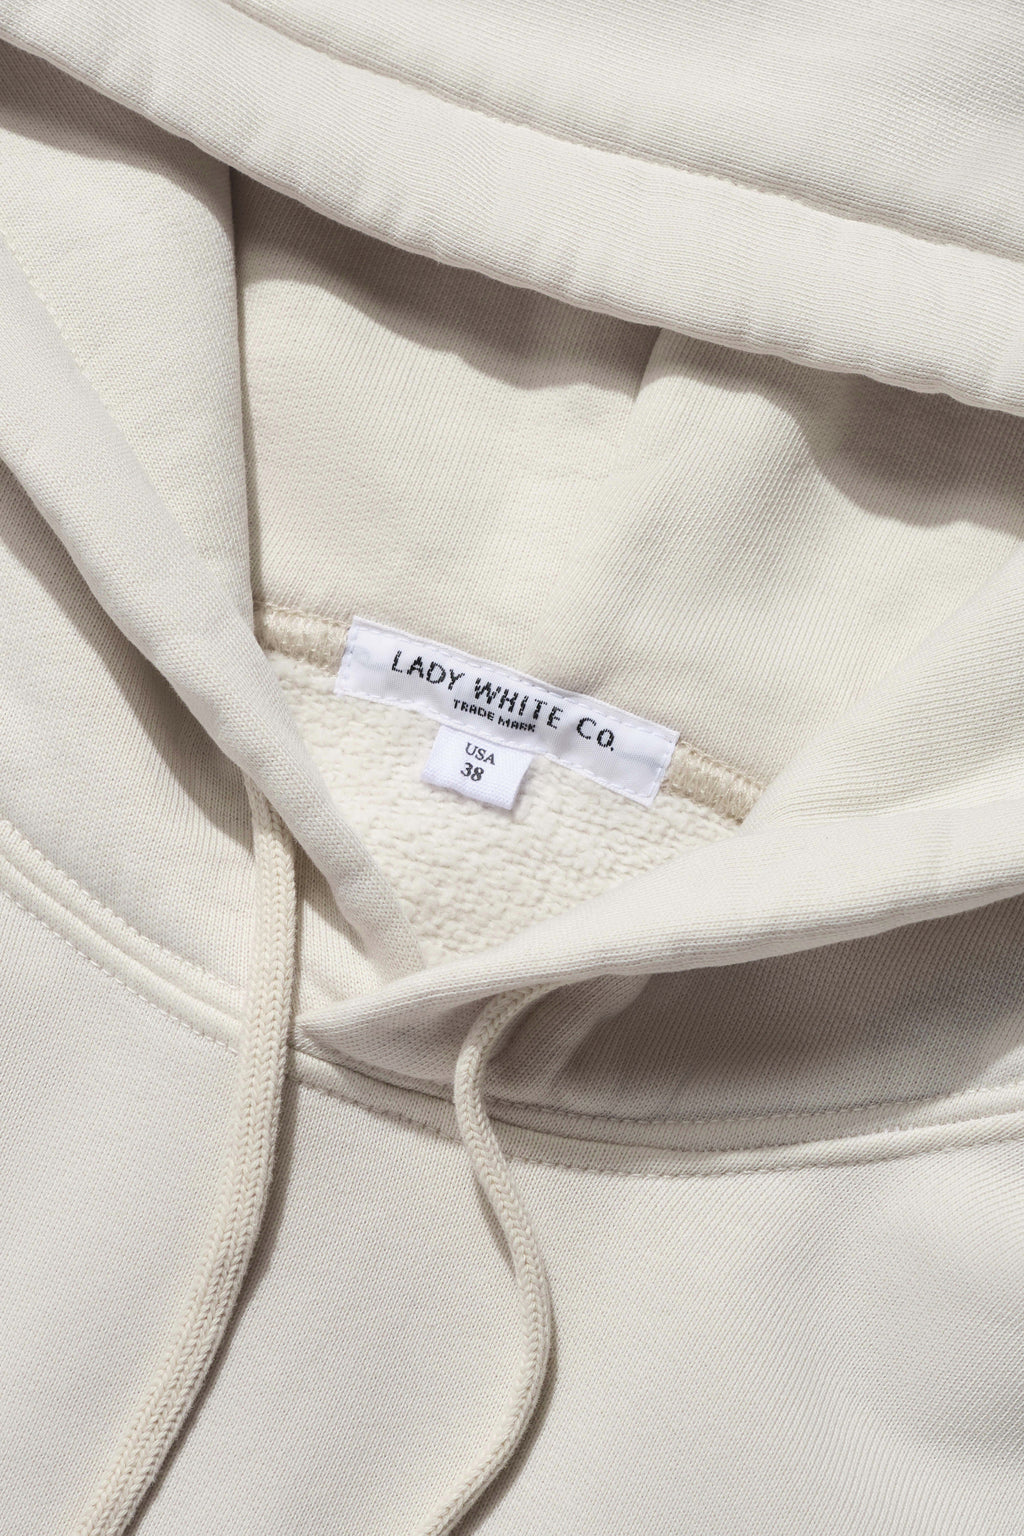 Lady White Co. LWC Hoodie - Off White XL